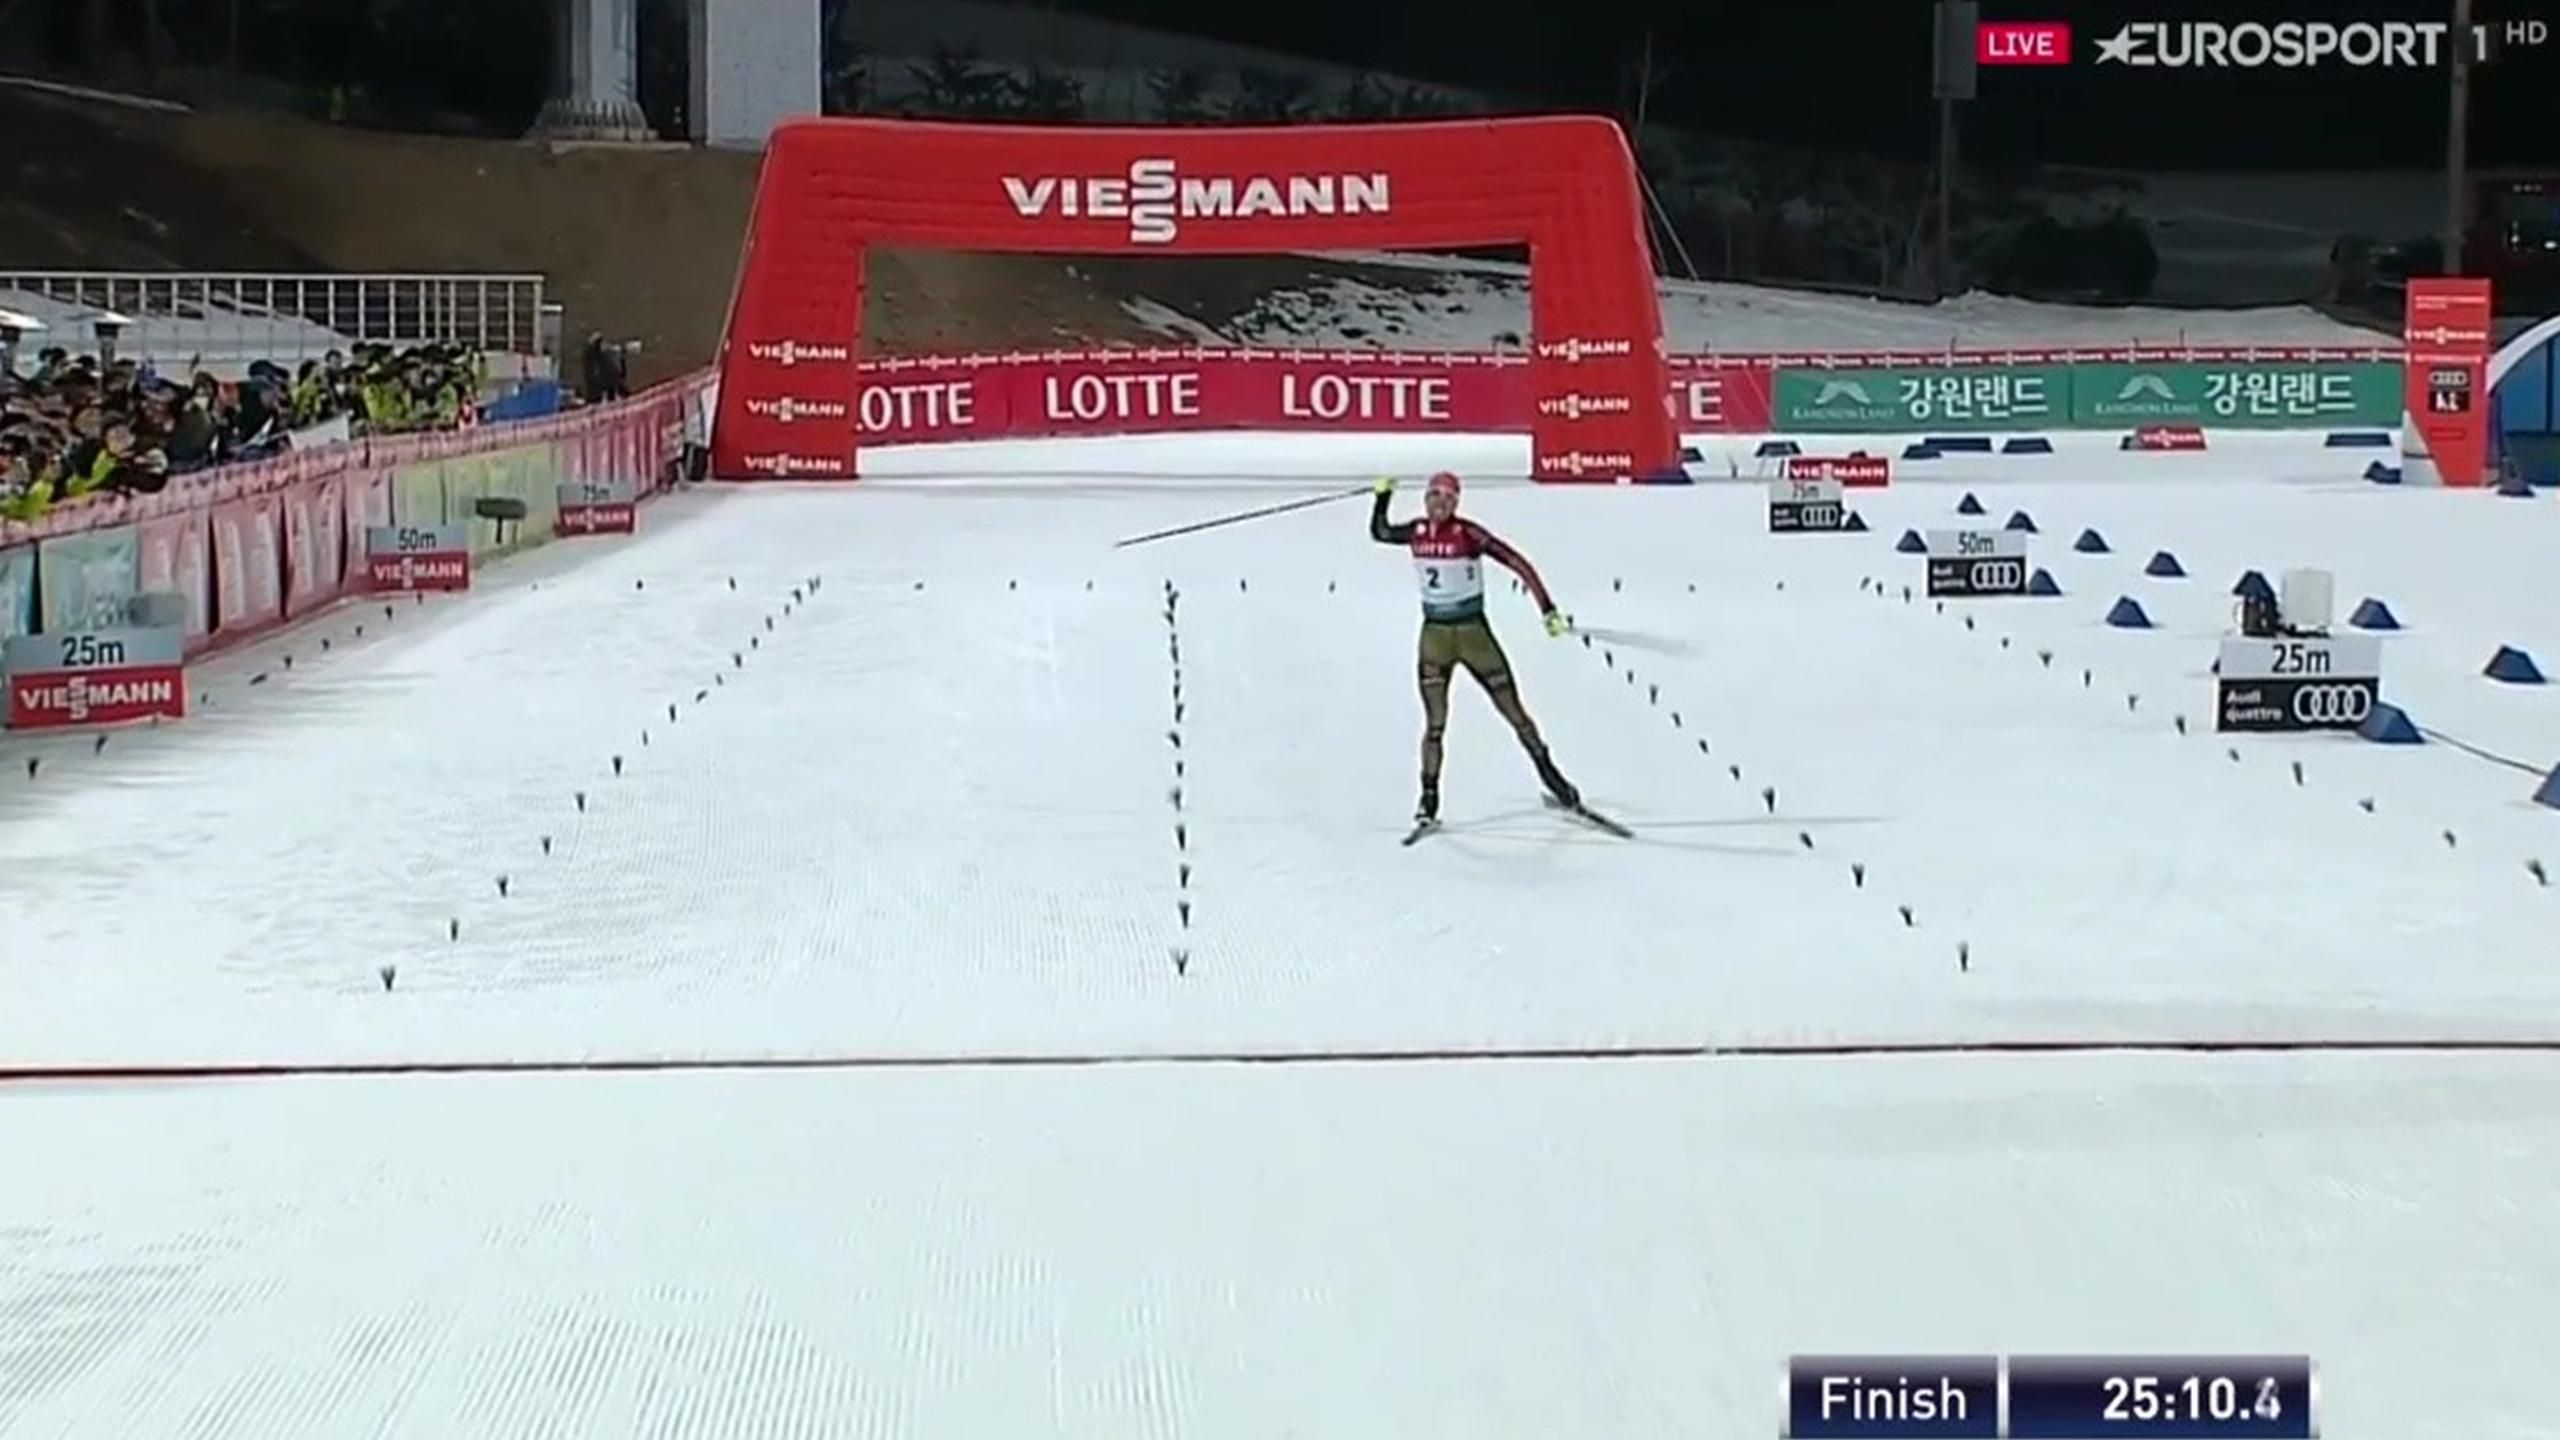 Johannes Rydzek takes Nordic Combined nail-biter to extend World Cup lead